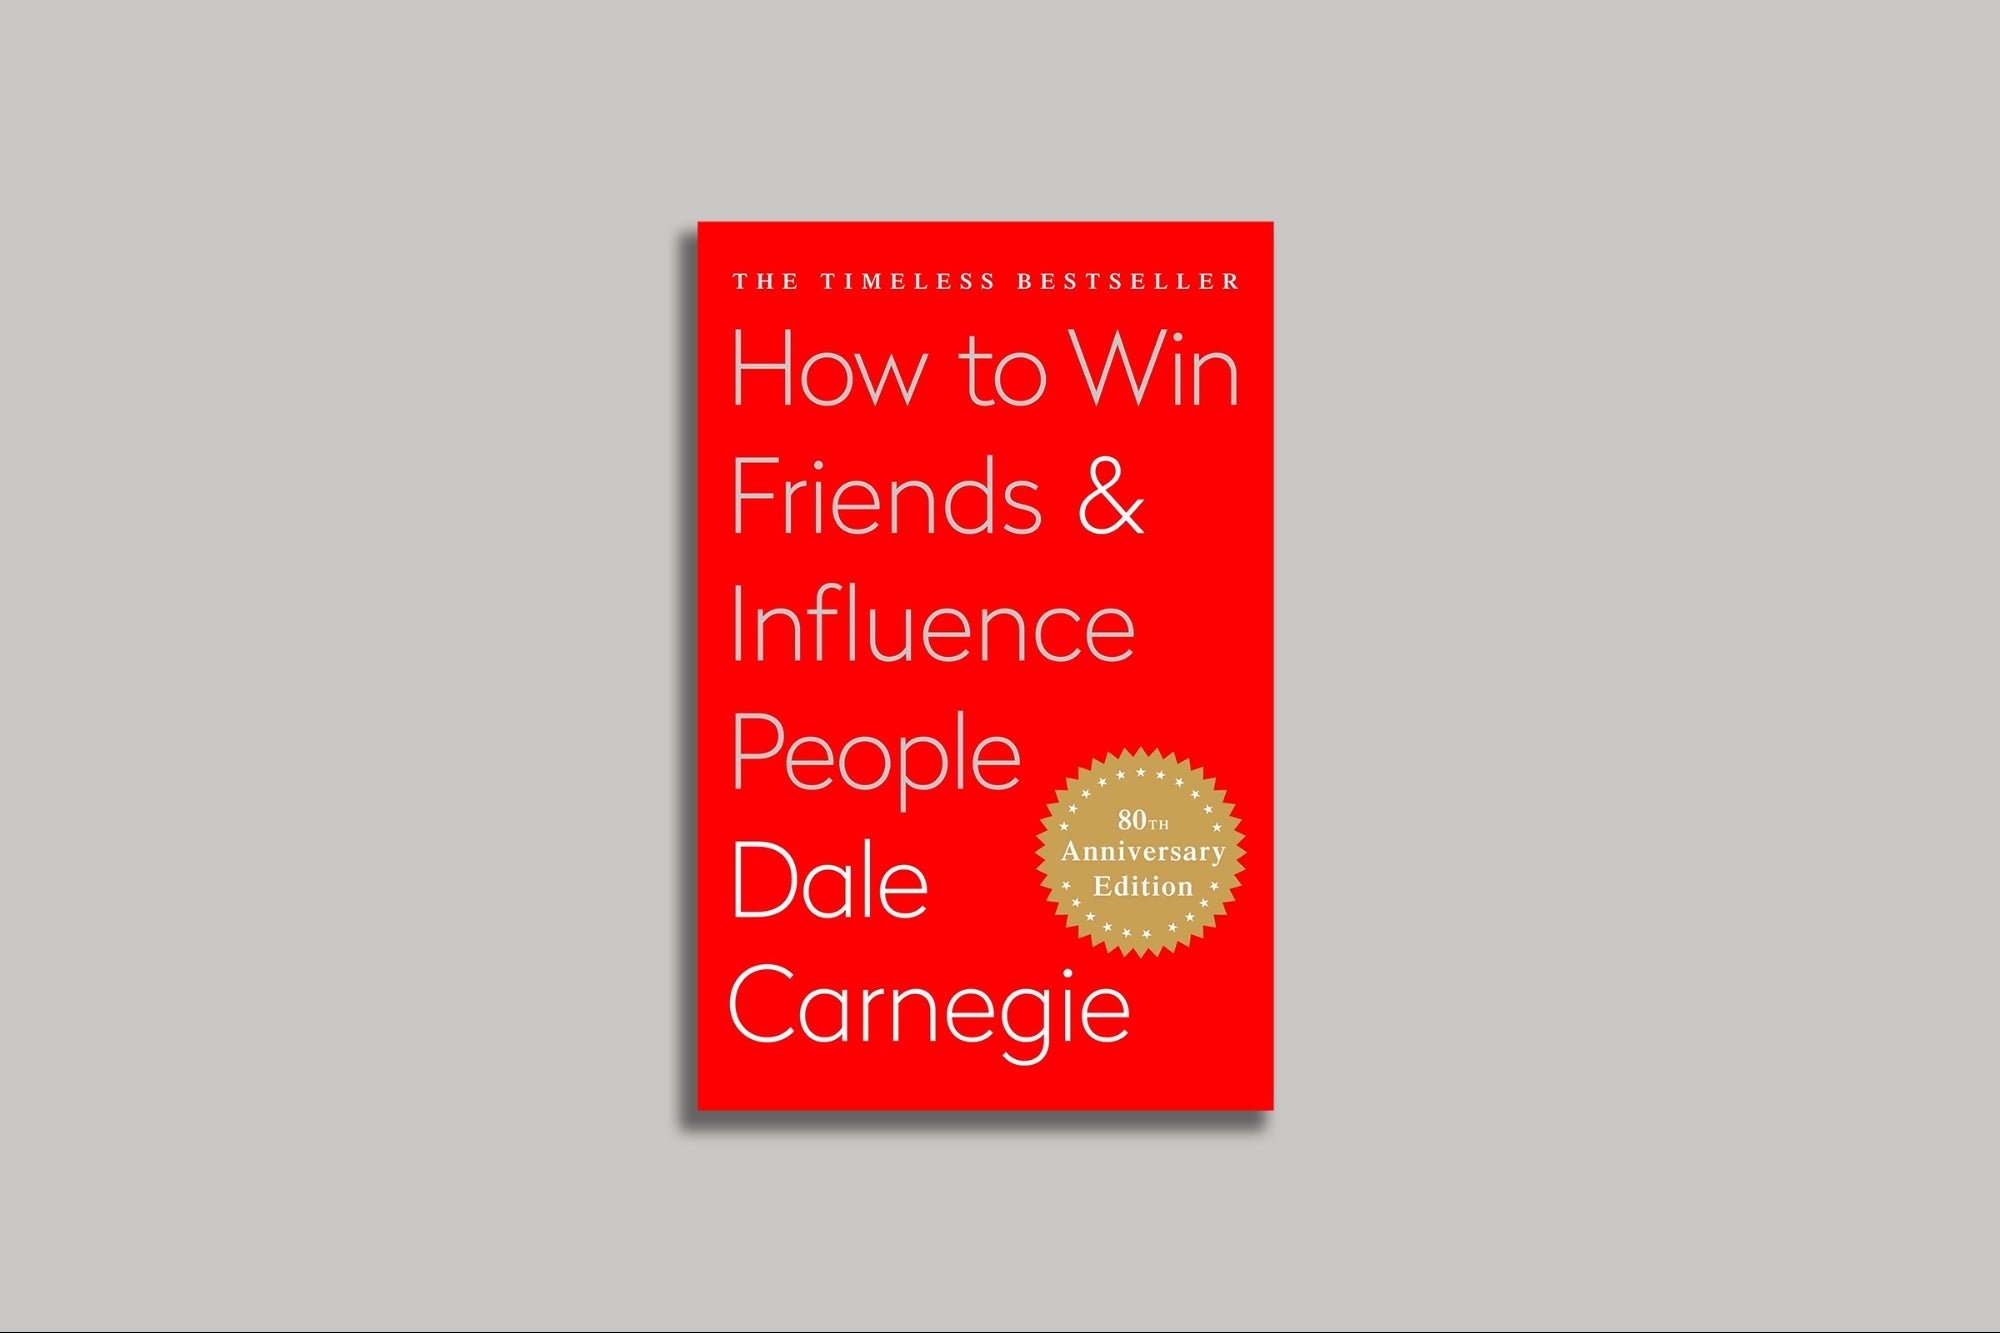 3 Invaluable Lessons for Media Outreach from Dale Carnegie's 'How to Win Friends and Influence People'